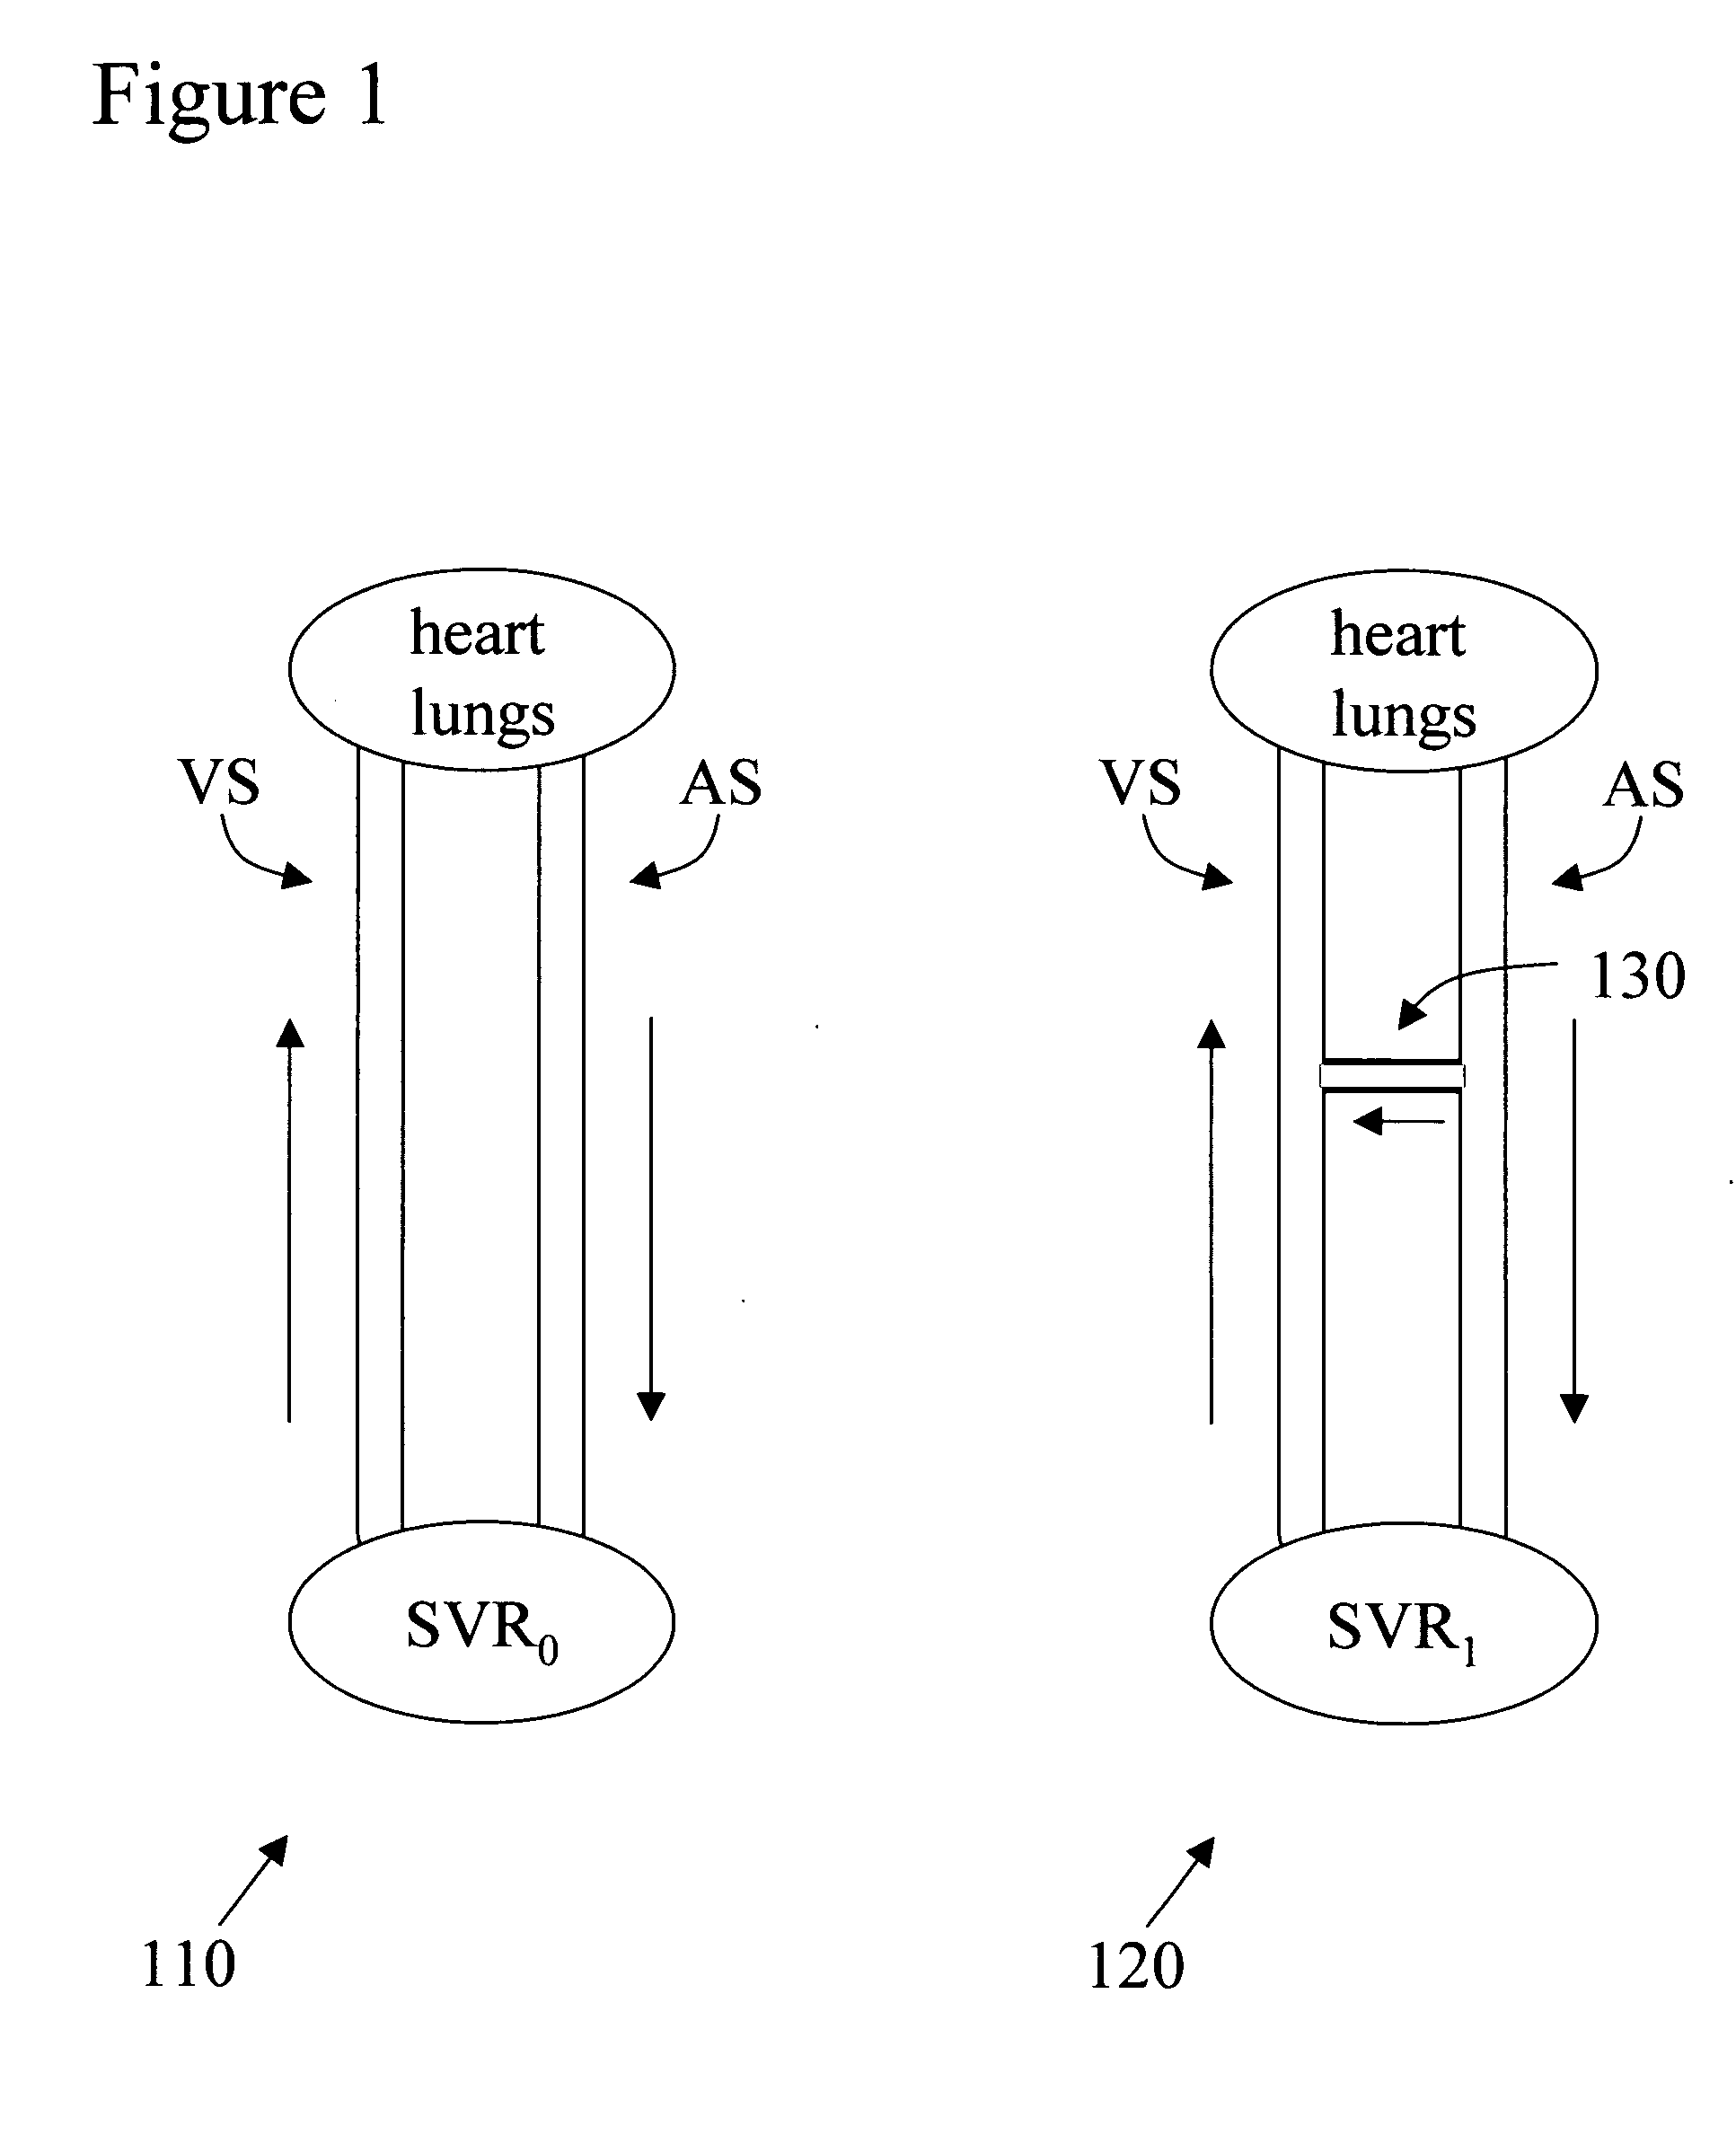 Implantable arterio-venous shunt devices and methods for their use